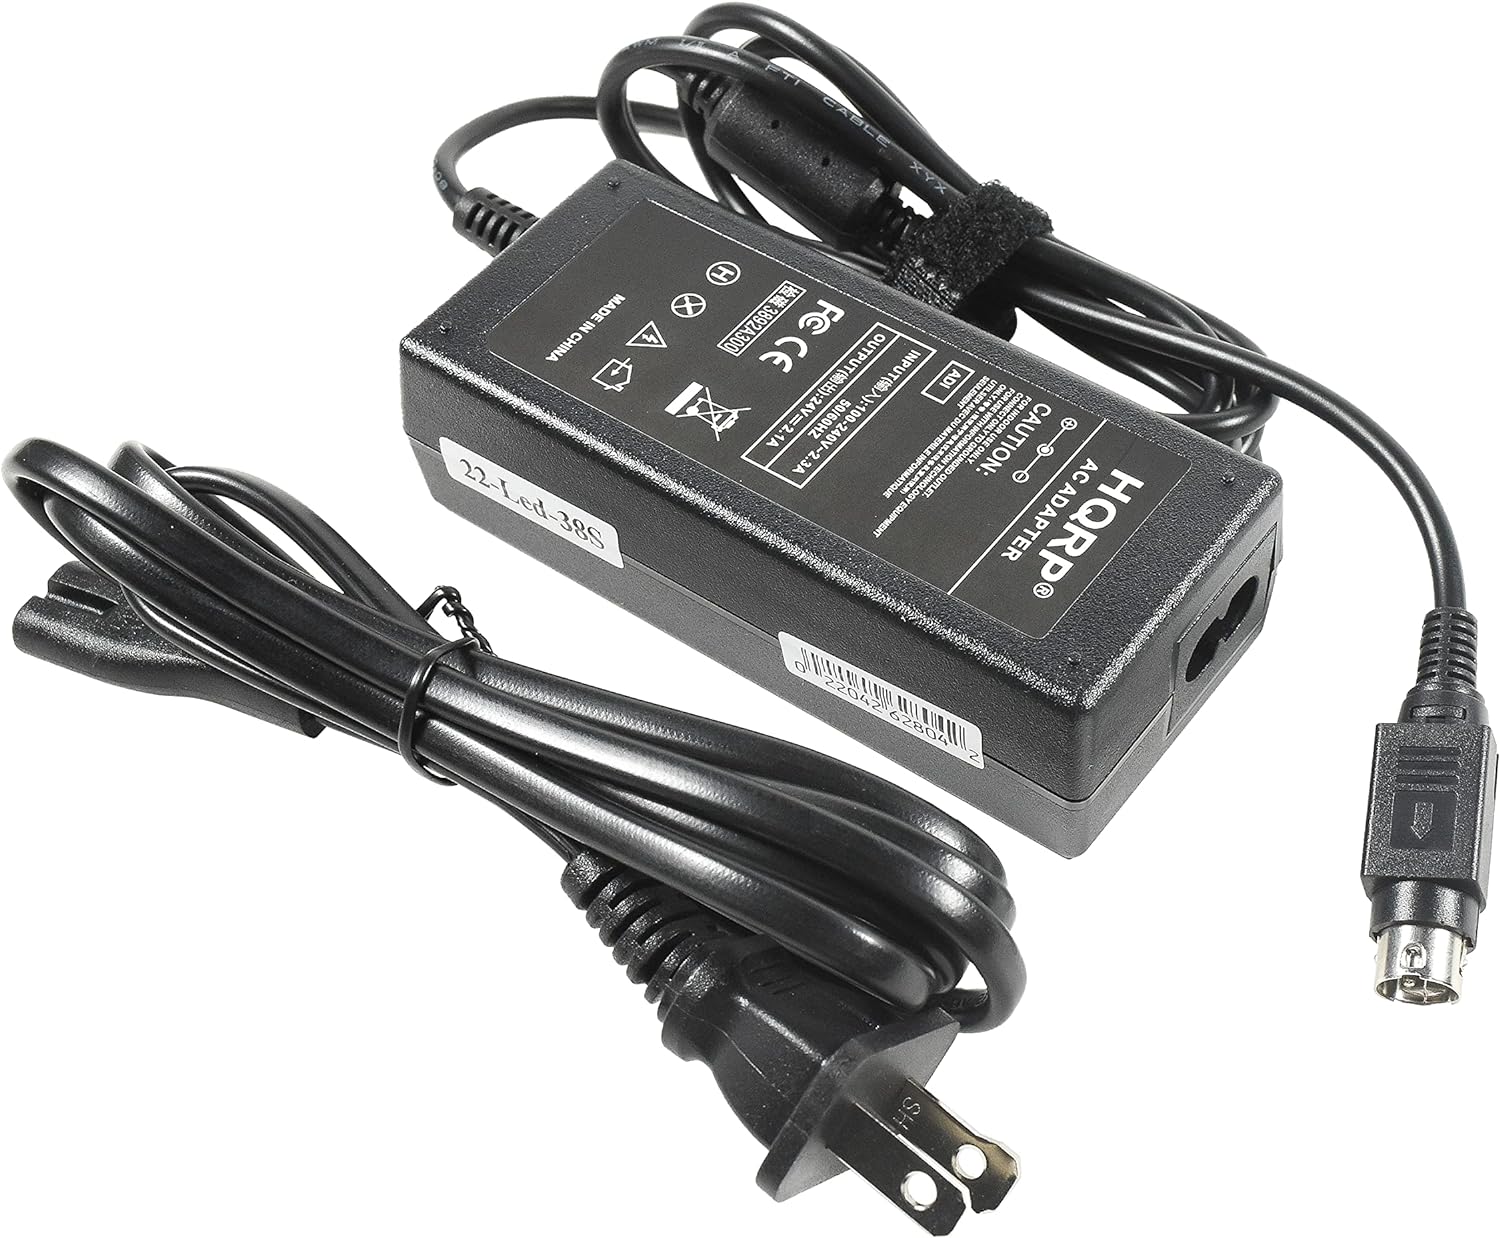 AC Adapter Compatible with Epson PS-180 PS-170 PS-150 PSA242 C32C825343 M159A M159B M235A M129C TM-U220 TM-U230 TM-U295 - Click Image to Close